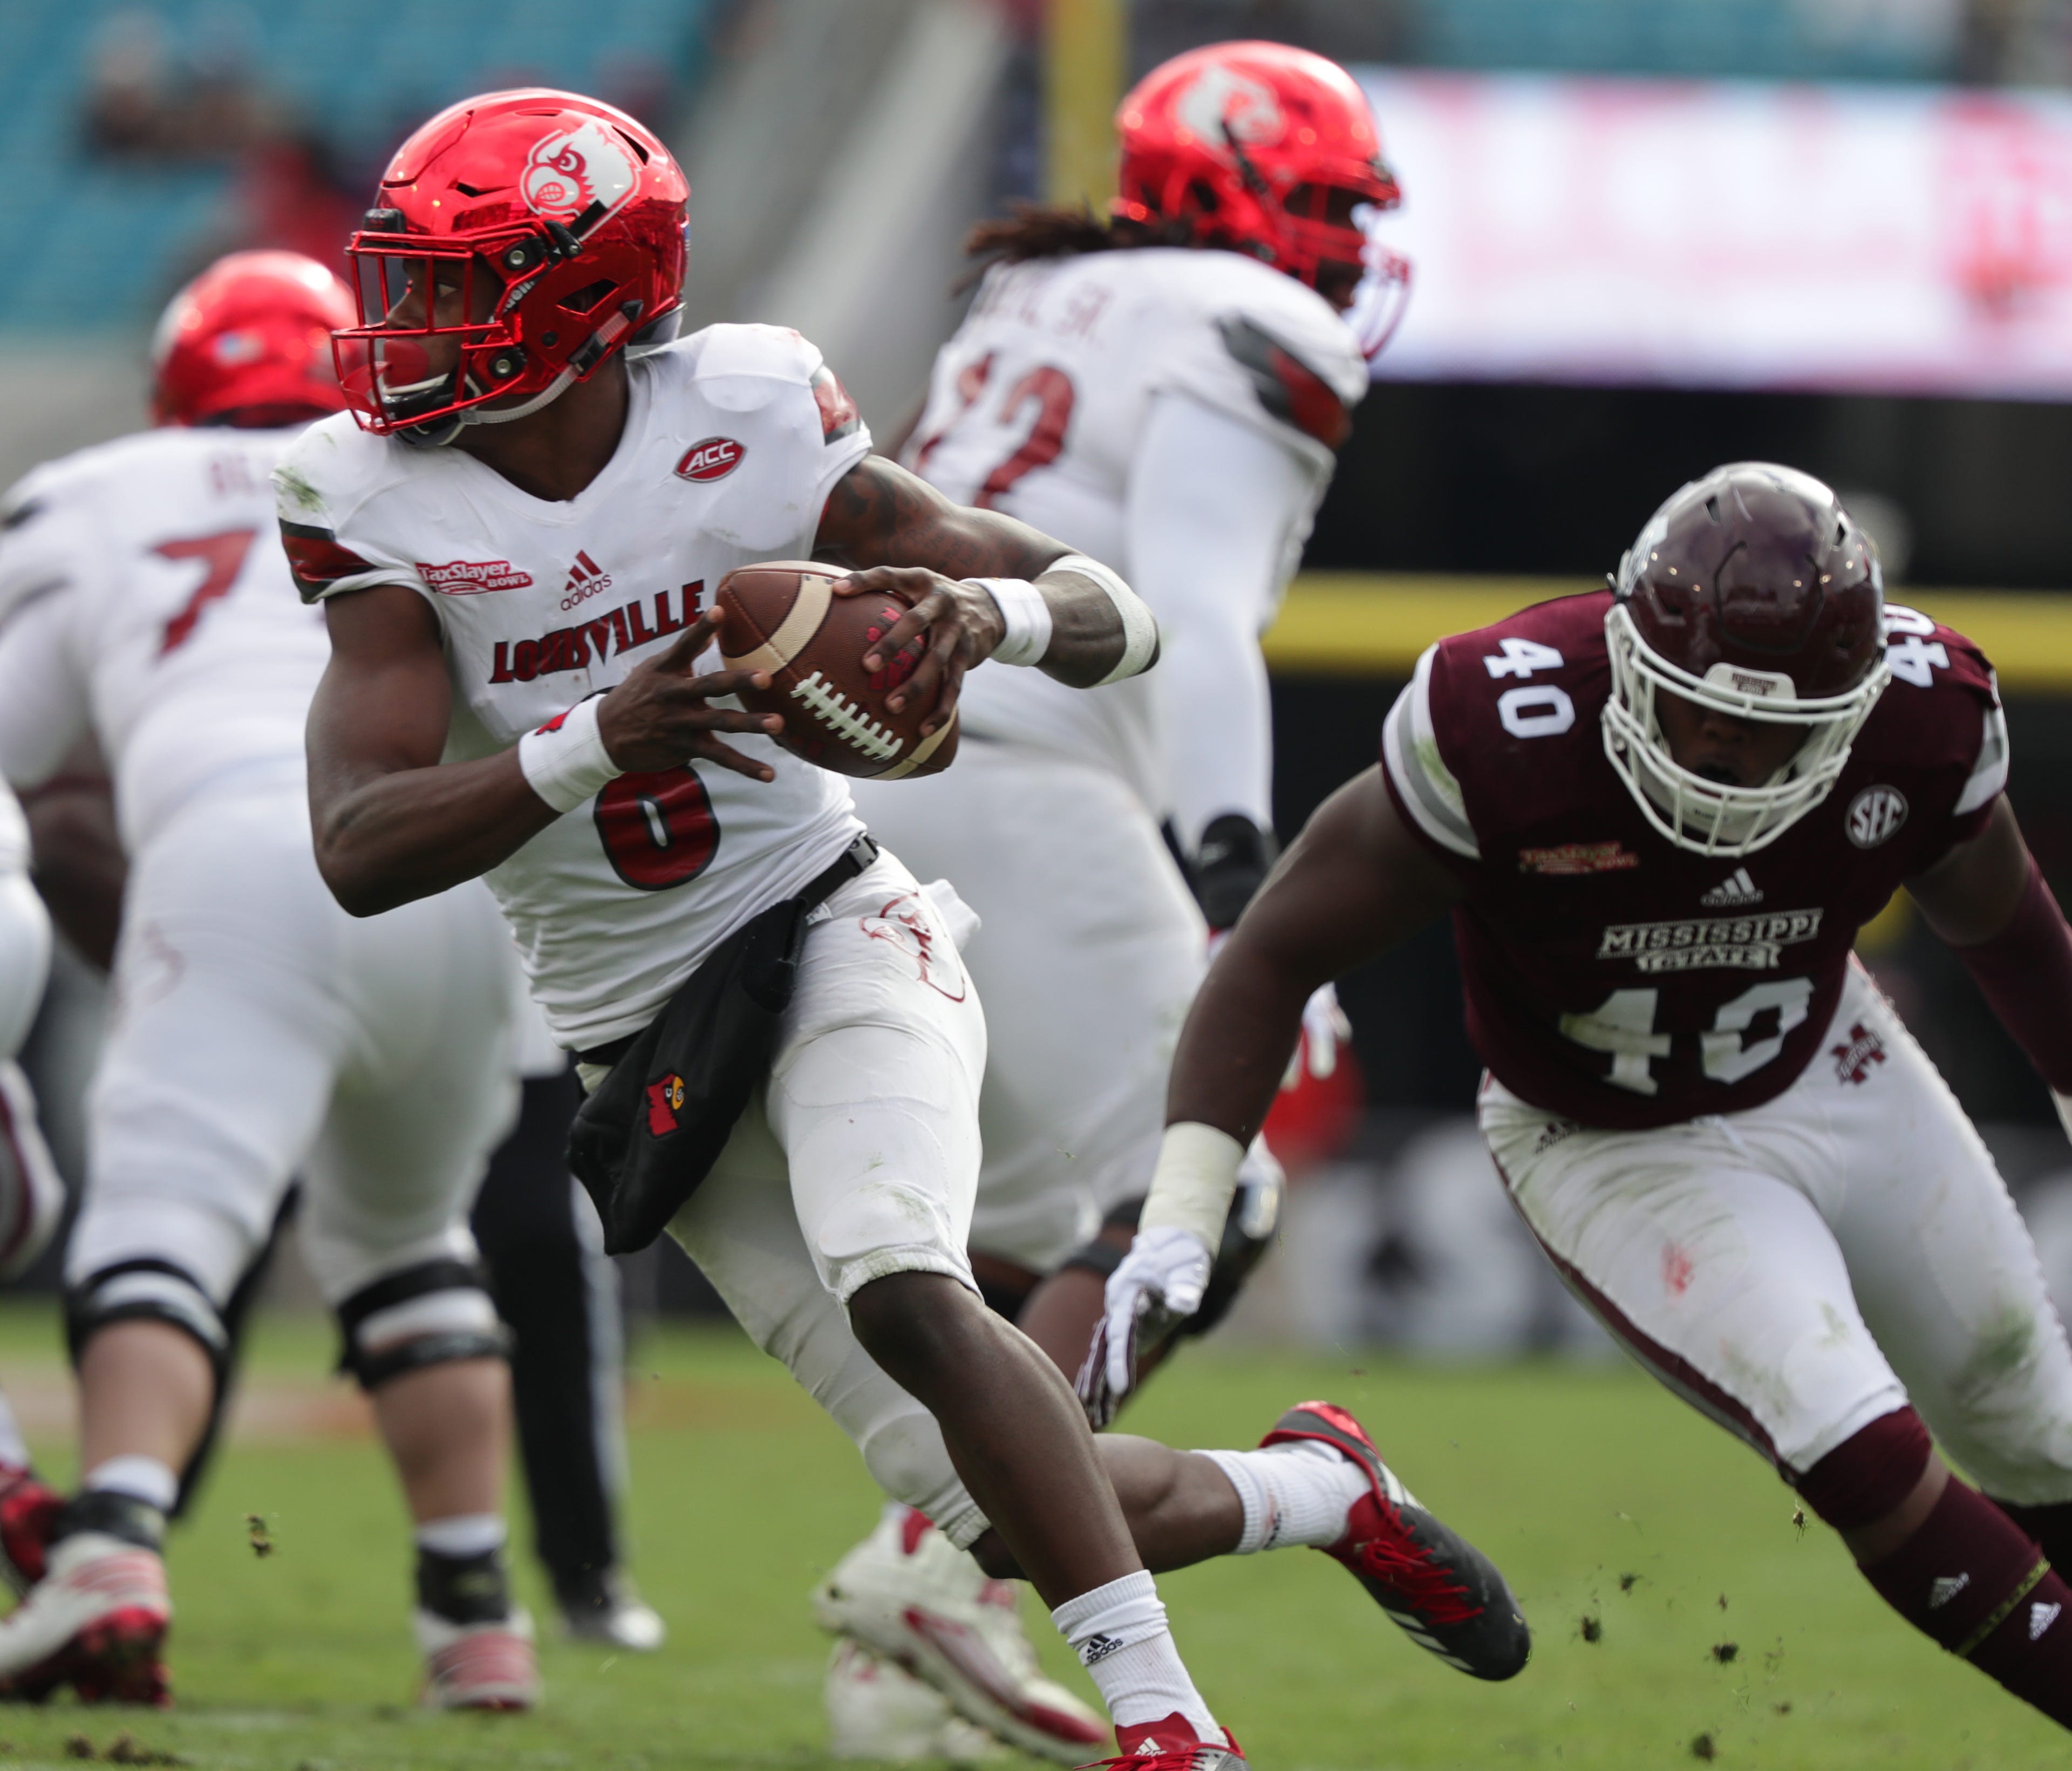 Louisville's Lamar Jackson scrambles to avoid a sack in the second half of the TaxSlayer Bowl against Mississippi State. Dec. 30, 2017